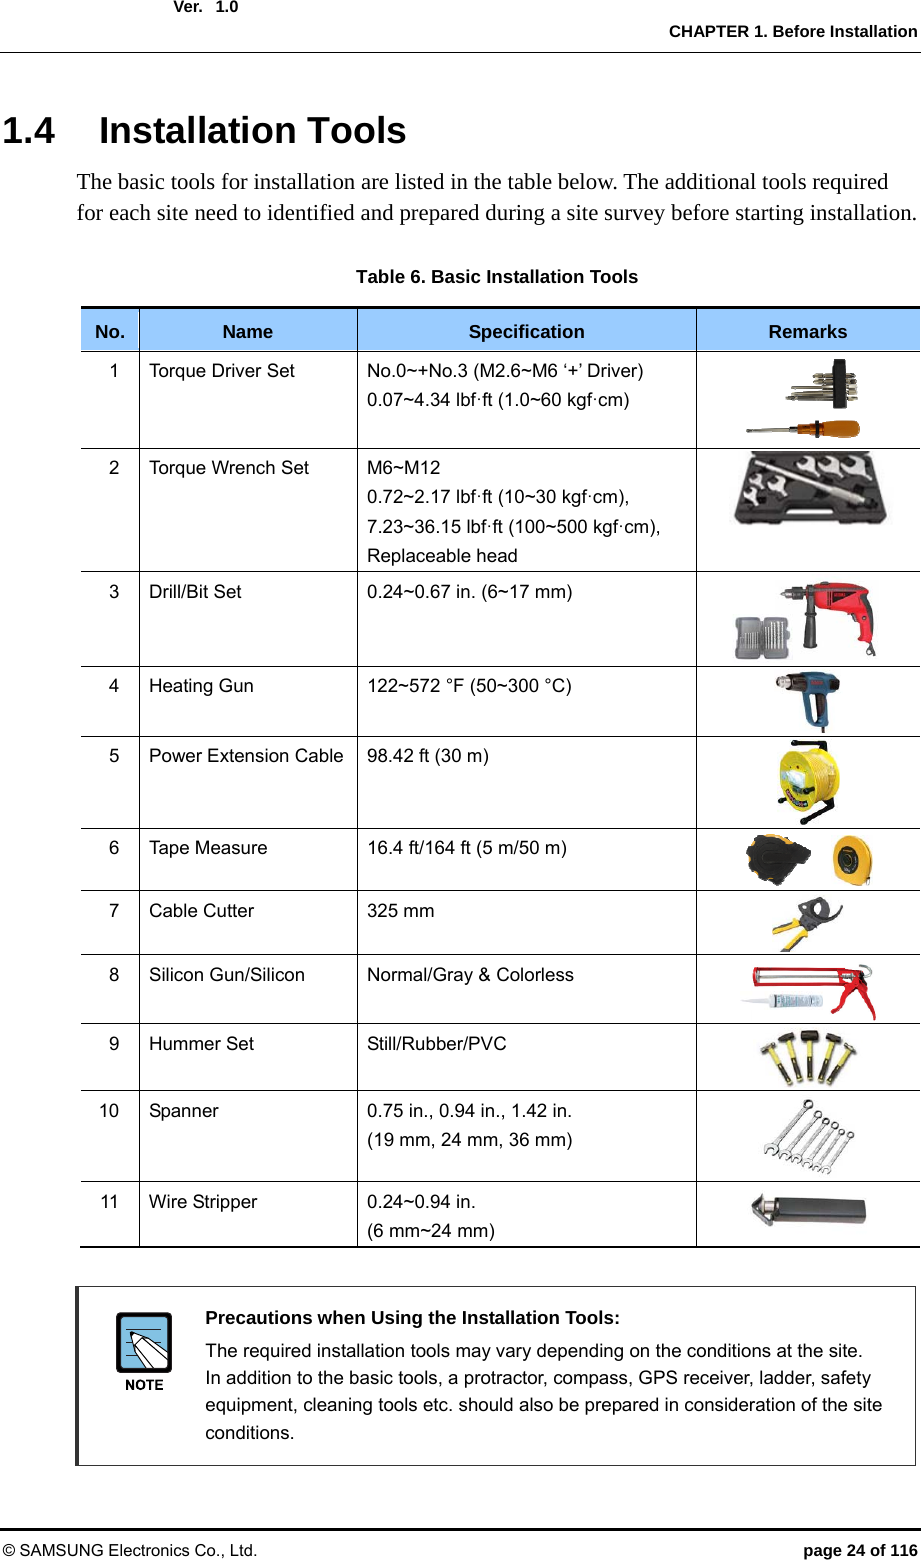  Ver.   CHAPTER 1. Before Installation © SAMSUNG Electronics Co., Ltd.  page 24 of 116 1.01.4 Installation Tools The basic tools for installation are listed in the table below. The additional tools required for each site need to identified and prepared during a site survey before starting installation.  Table 6. Basic Installation Tools No.  Name  Specification  Remarks 1  Torque Driver Set  No.0~+No.3 (M2.6~M6 ‘+’ Driver) 0.07~4.34 lbf·ft (1.0~60 kgf·cm)  2  Torque Wrench Set  M6~M12 0.72~2.17 lbf·ft (10~30 kgf·cm),  7.23~36.15 lbf·ft (100~500 kgf·cm), Replaceable head  3  Drill/Bit Set  0.24~0.67 in. (6~17 mm) 4  Heating Gun  122~572 °F (50~300 °C)  5  Power Extension Cable  98.42 ft (30 m)  6  Tape Measure  16.4 ft/164 ft (5 m/50 m)  7  Cable Cutter  325 mm  8  Silicon Gun/Silicon  Normal/Gray &amp; Colorless    9 Hummer Set  Still/Rubber/PVC  10  Spanner  0.75 in., 0.94 in., 1.42 in. (19 mm, 24 mm, 36 mm)  11  Wire Stripper  0.24~0.94 in. (6 mm~24 mm)      Precautions when Using the Installation Tools:   The required installation tools may vary depending on the conditions at the site.   In addition to the basic tools, a protractor, compass, GPS receiver, ladder, safety equipment, cleaning tools etc. should also be prepared in consideration of the site conditions.  